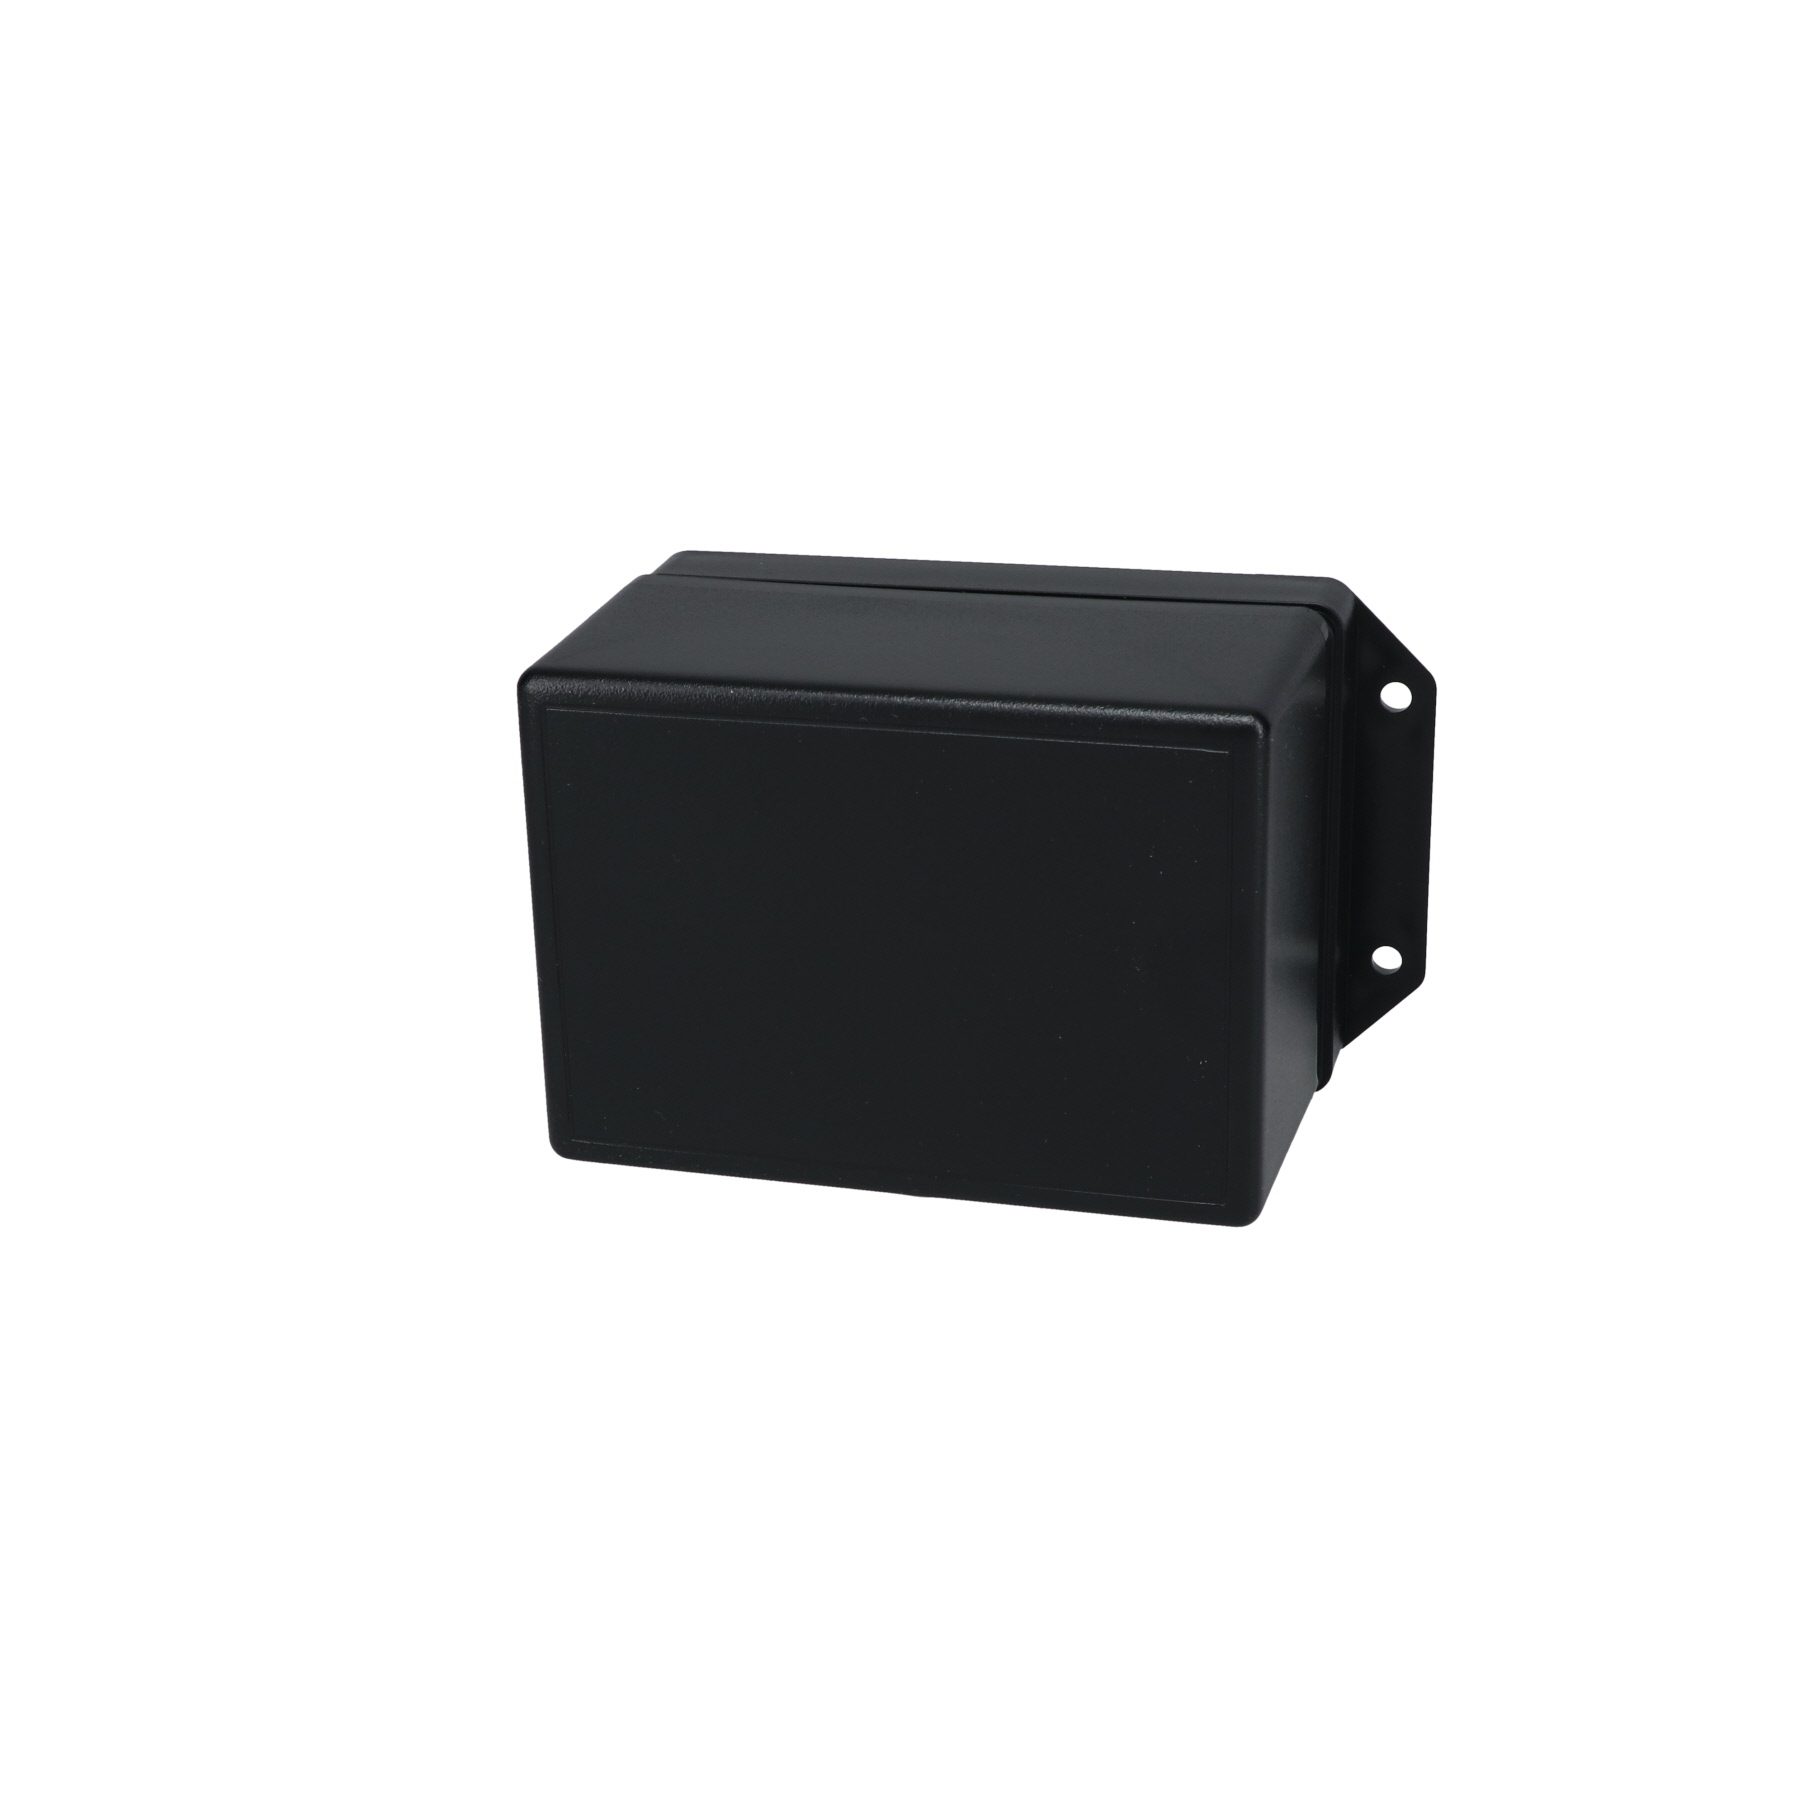 Utilibox Style H Plastic Utility Box with Mounting Flanges CU-1476-MB